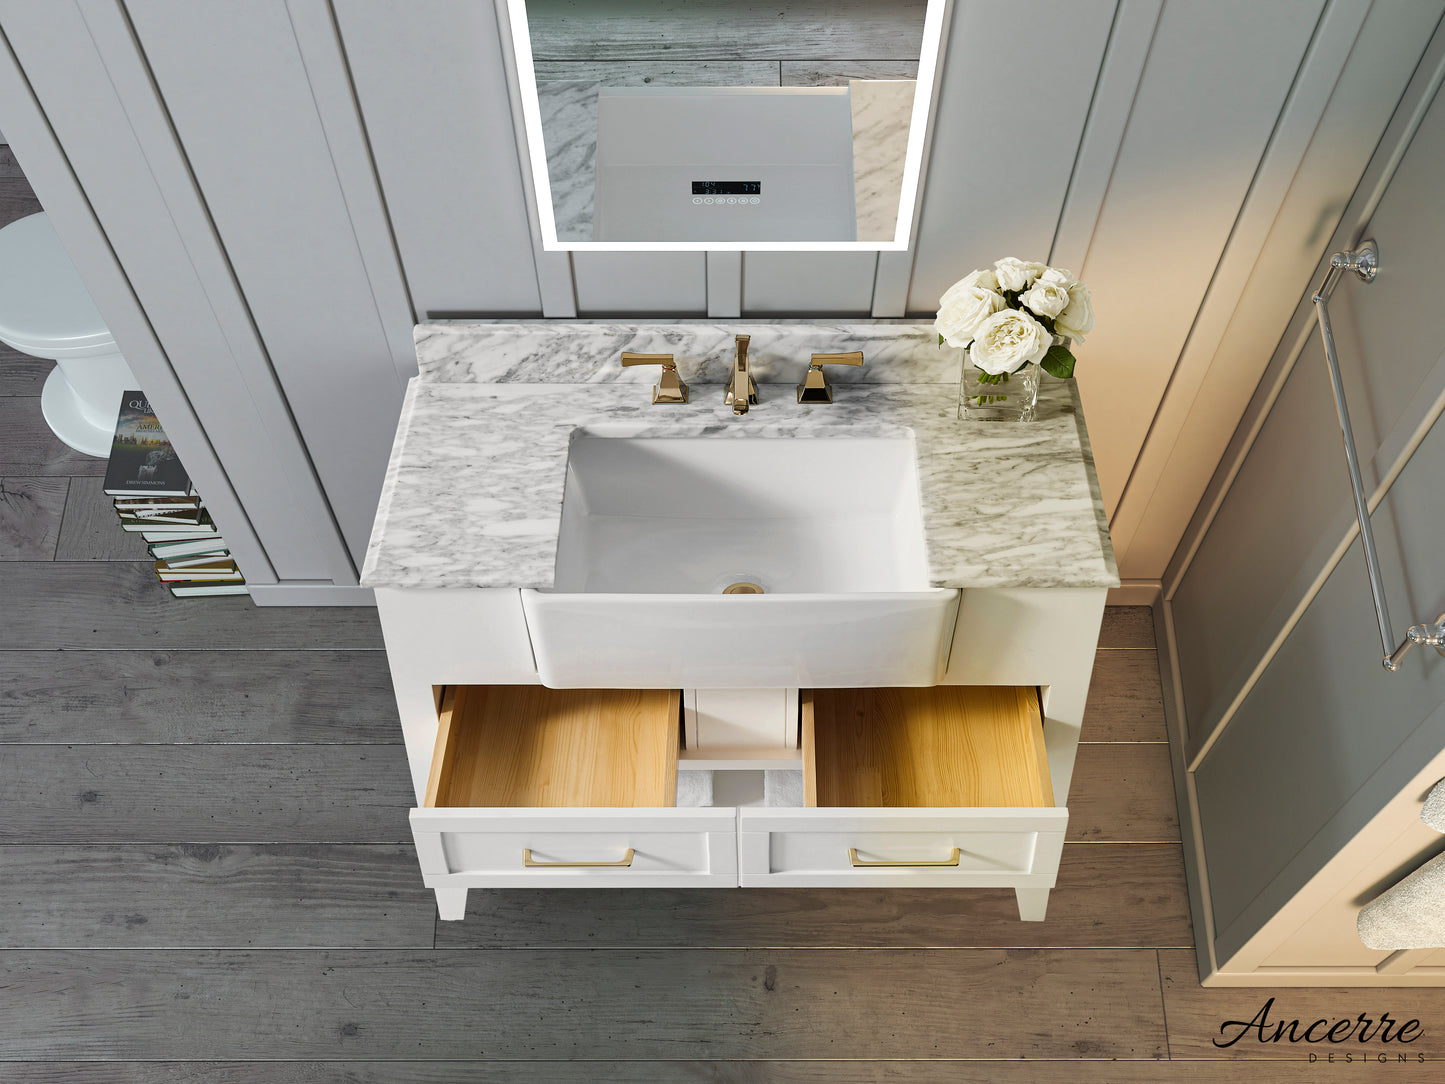 Hayley 36" White with Carrara White Marble Countertop with Ceramic Undermount Apron Basin